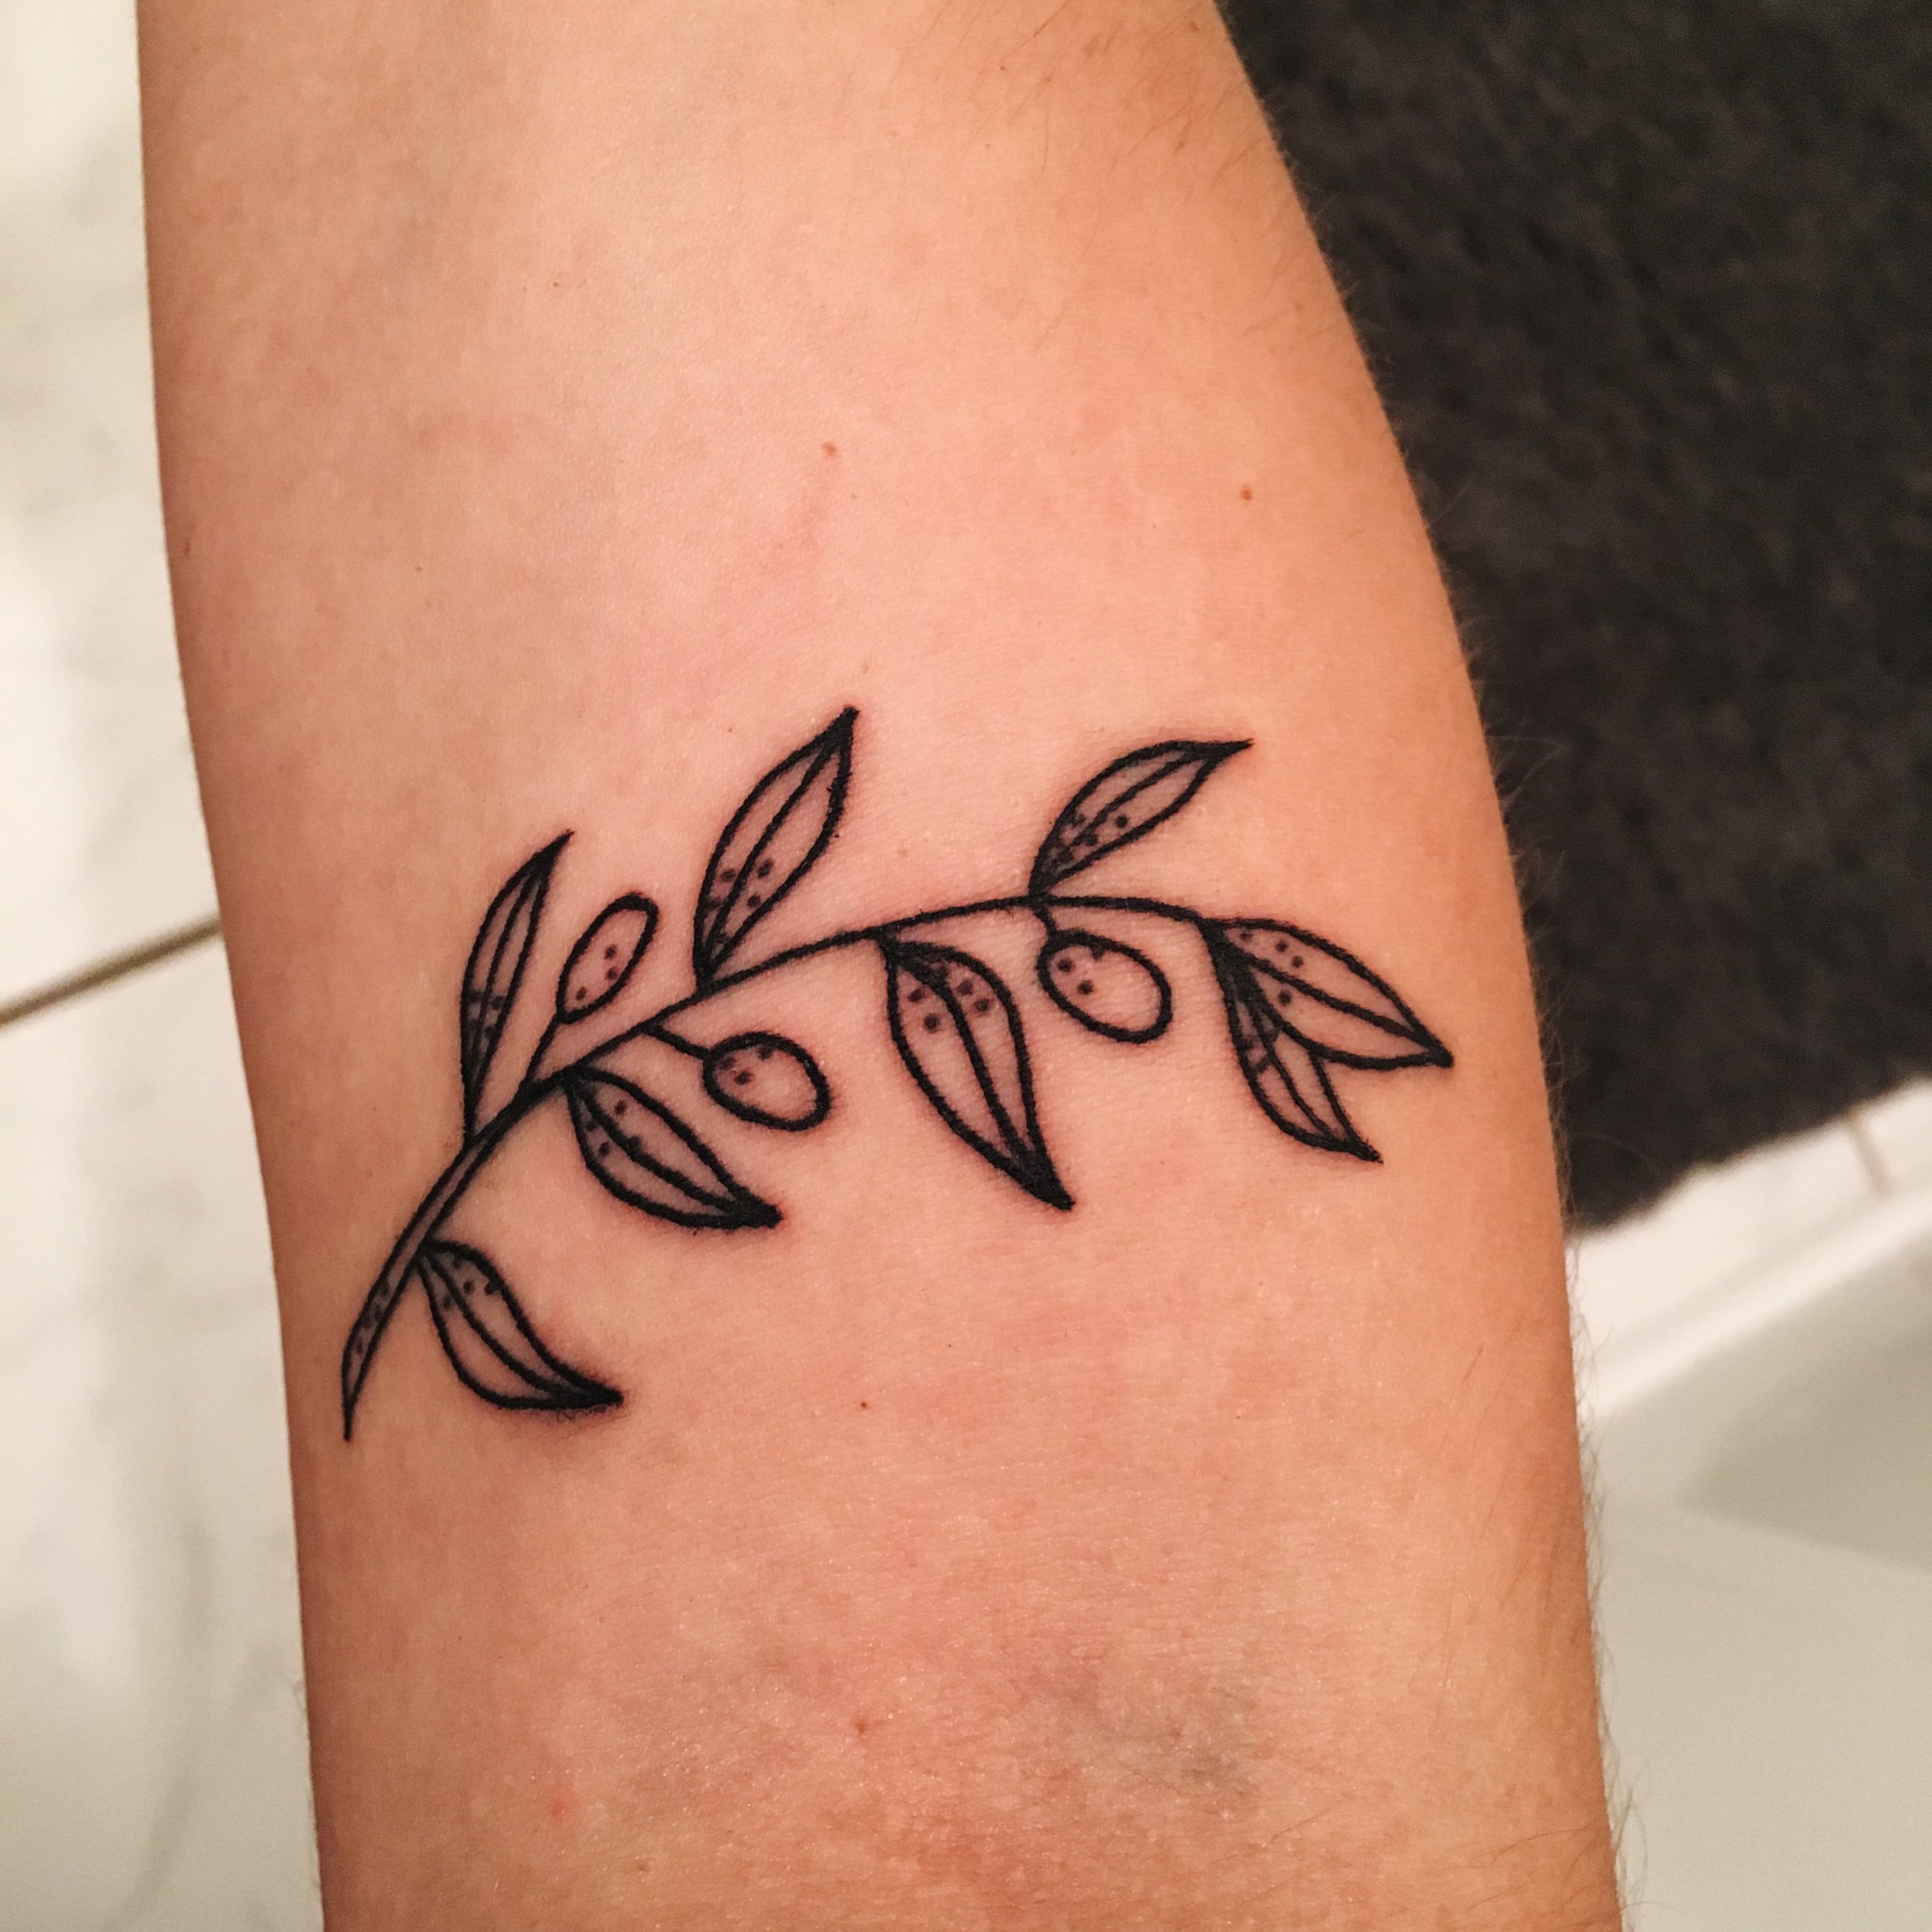 What does an olive branch tattoo mean